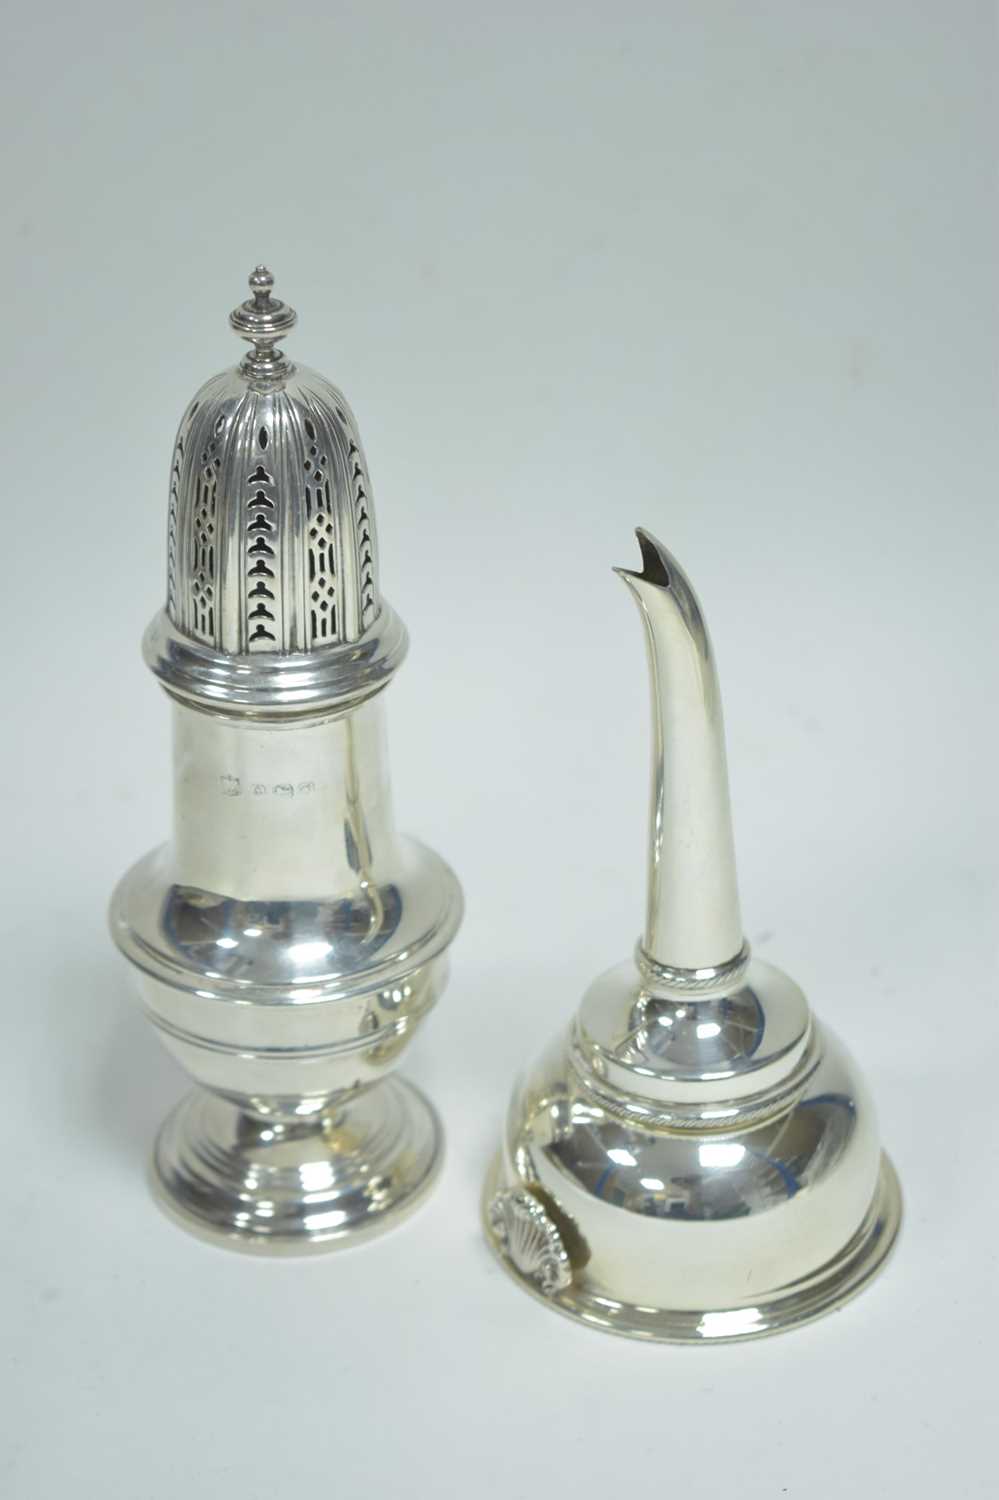 Lot 27 - Silver wine funnel and sugar sifter